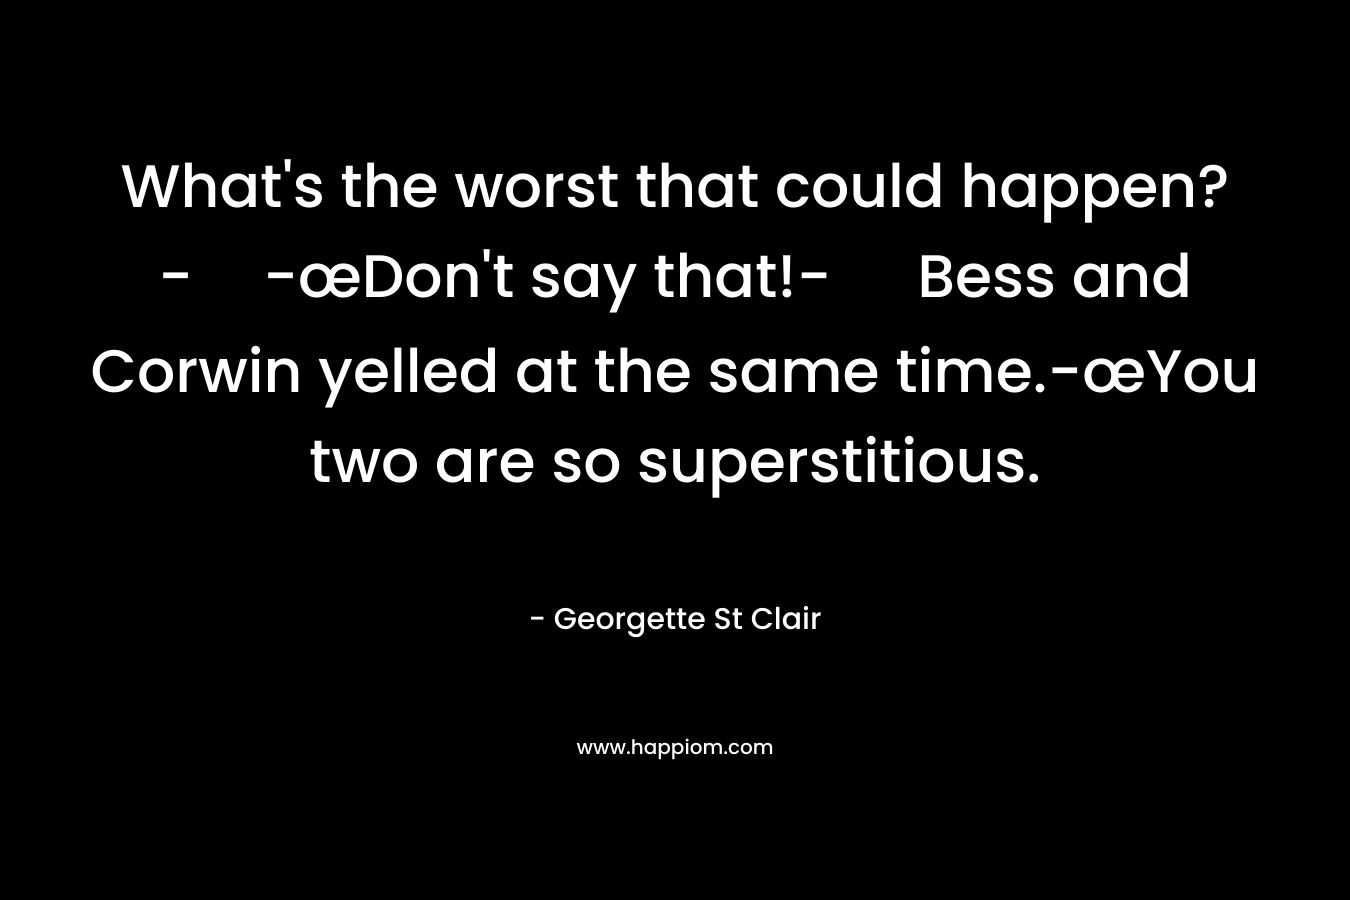 What’s the worst that could happen?--œDon’t say that!- Bess and Corwin yelled at the same time.-œYou two are so superstitious. – Georgette St Clair